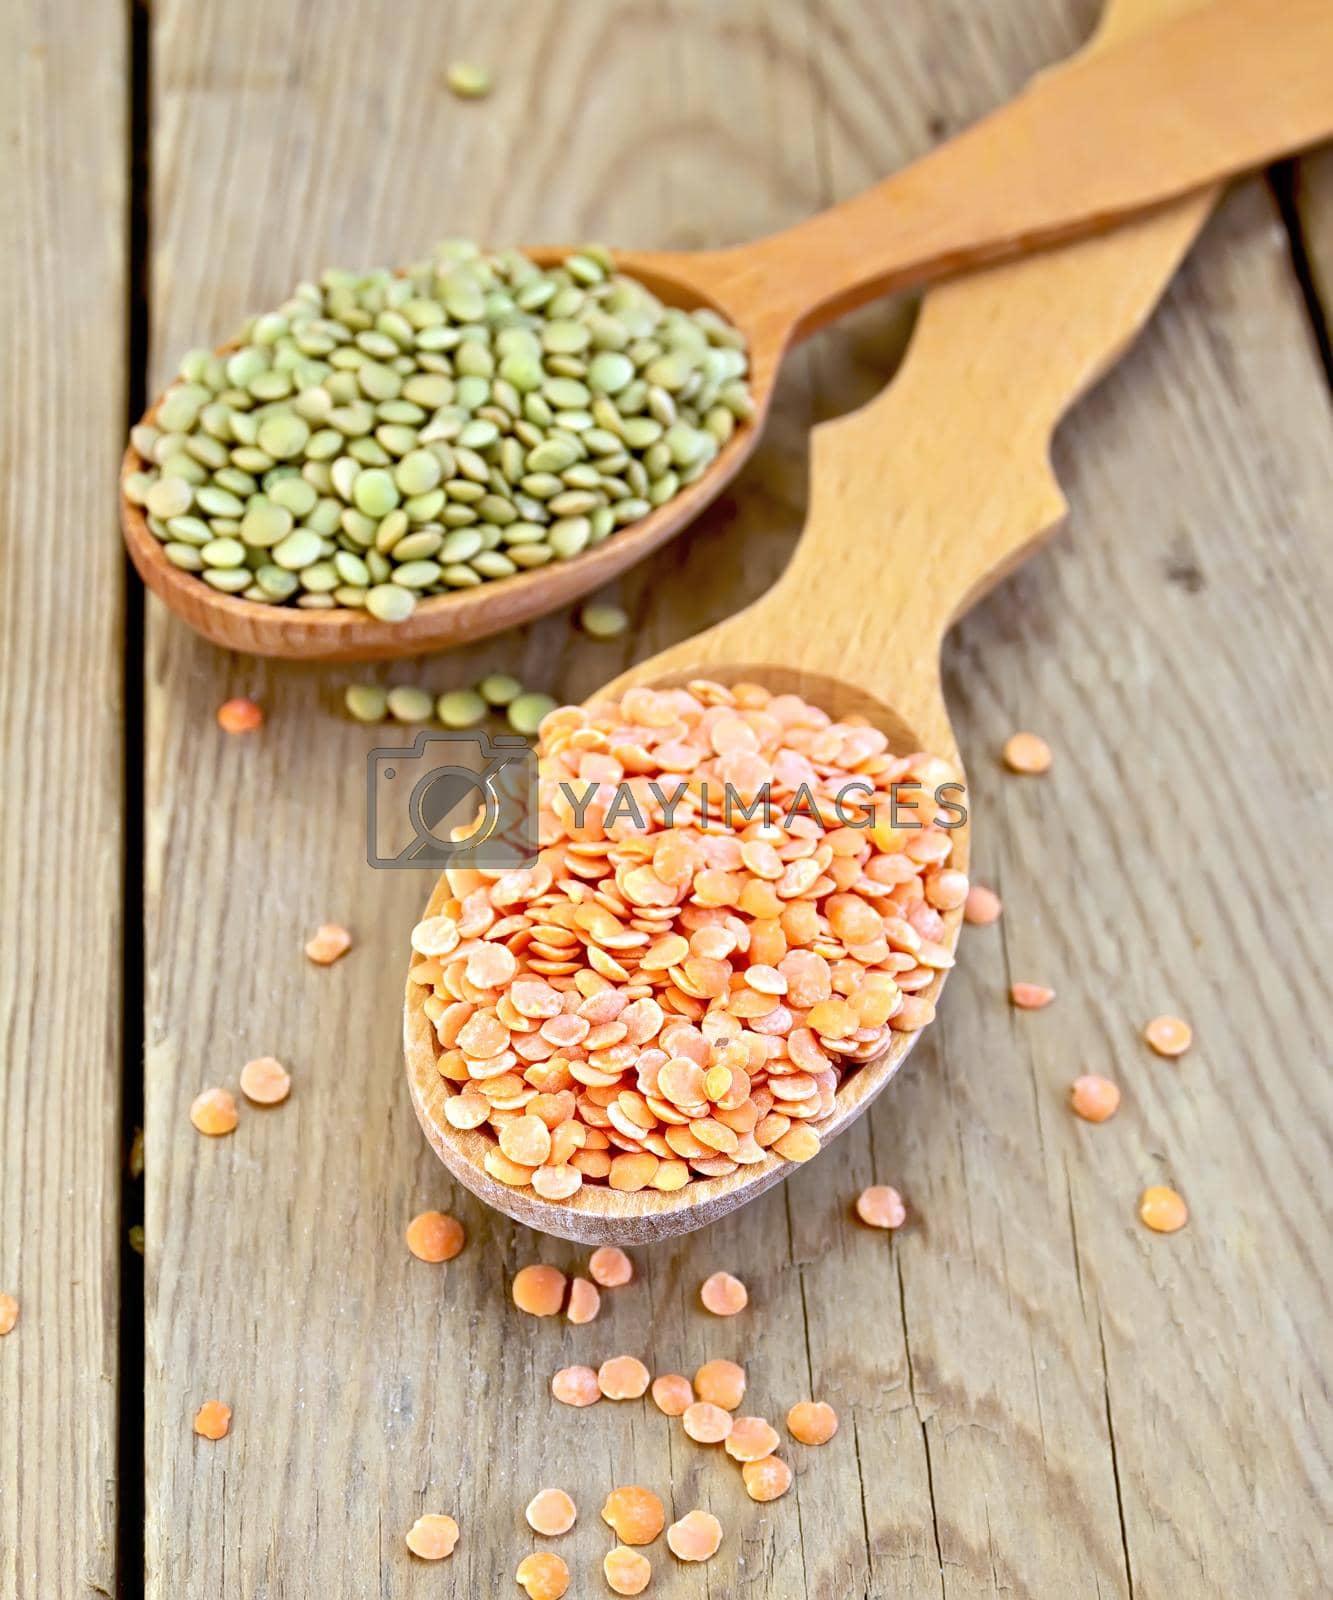 Royalty free image of Lentils red and green in spoon on wooden board by rezkrr